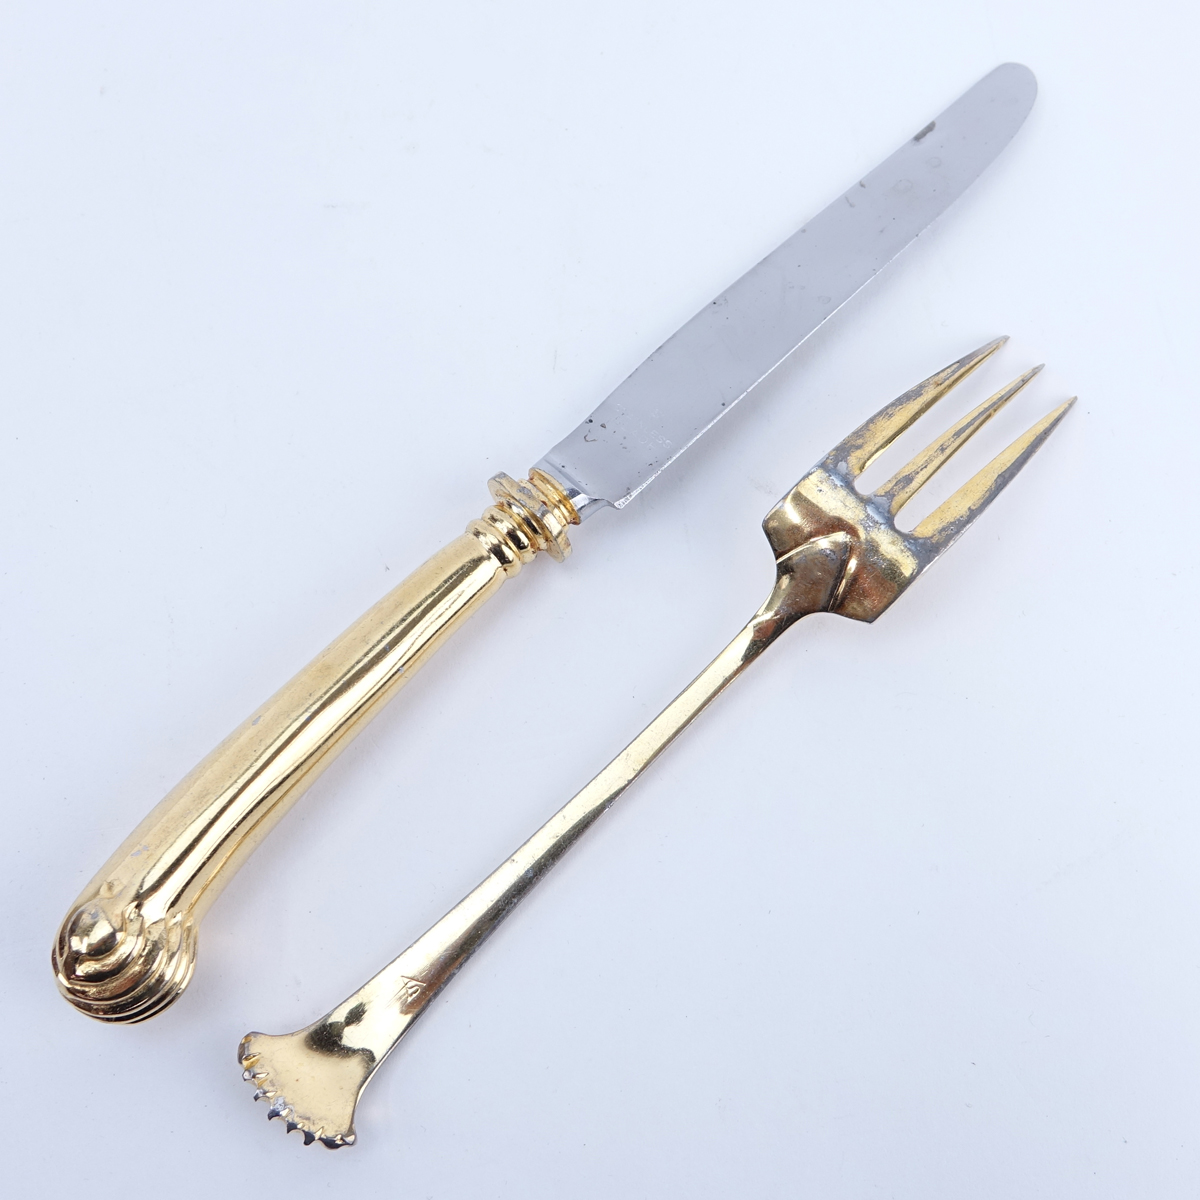 Ninety Eight (98) Pieces Oxford House Gold Plated Stainless Flatware. Set includes: 12 forks 7-1/4", 17 knives 9-1/2", 16 salad forks, 7 soup spoons, 9 teaspoons, 12 cocktail forks, 20 butter paddles, meat fork, slotted spoon, pie server, 2 serving spoons